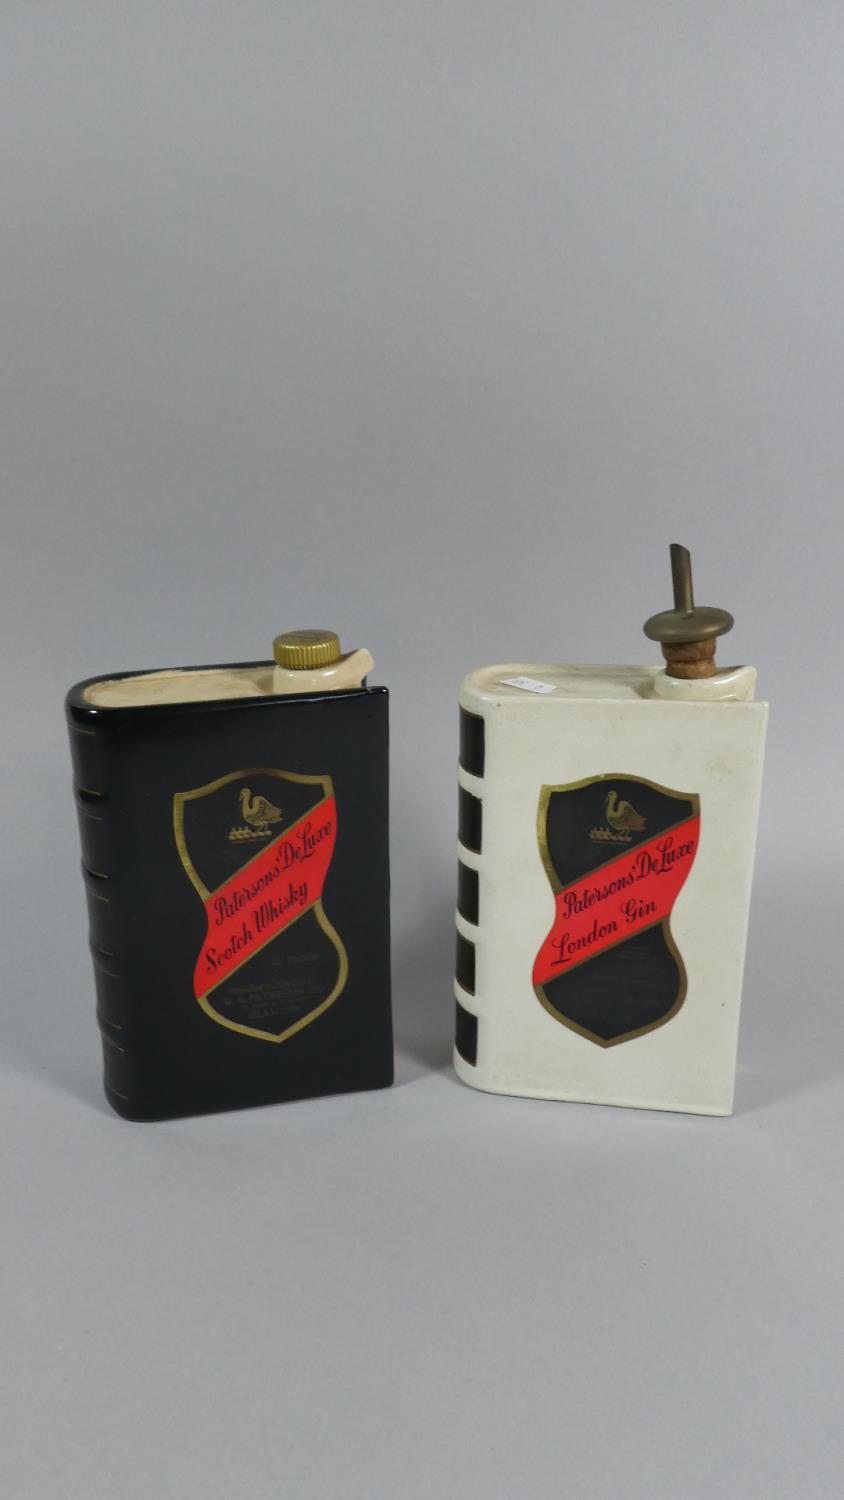 A Pair of Patersons' Ceramic Decanters in the Form of Books, for Scotch Whisky and London Gin,